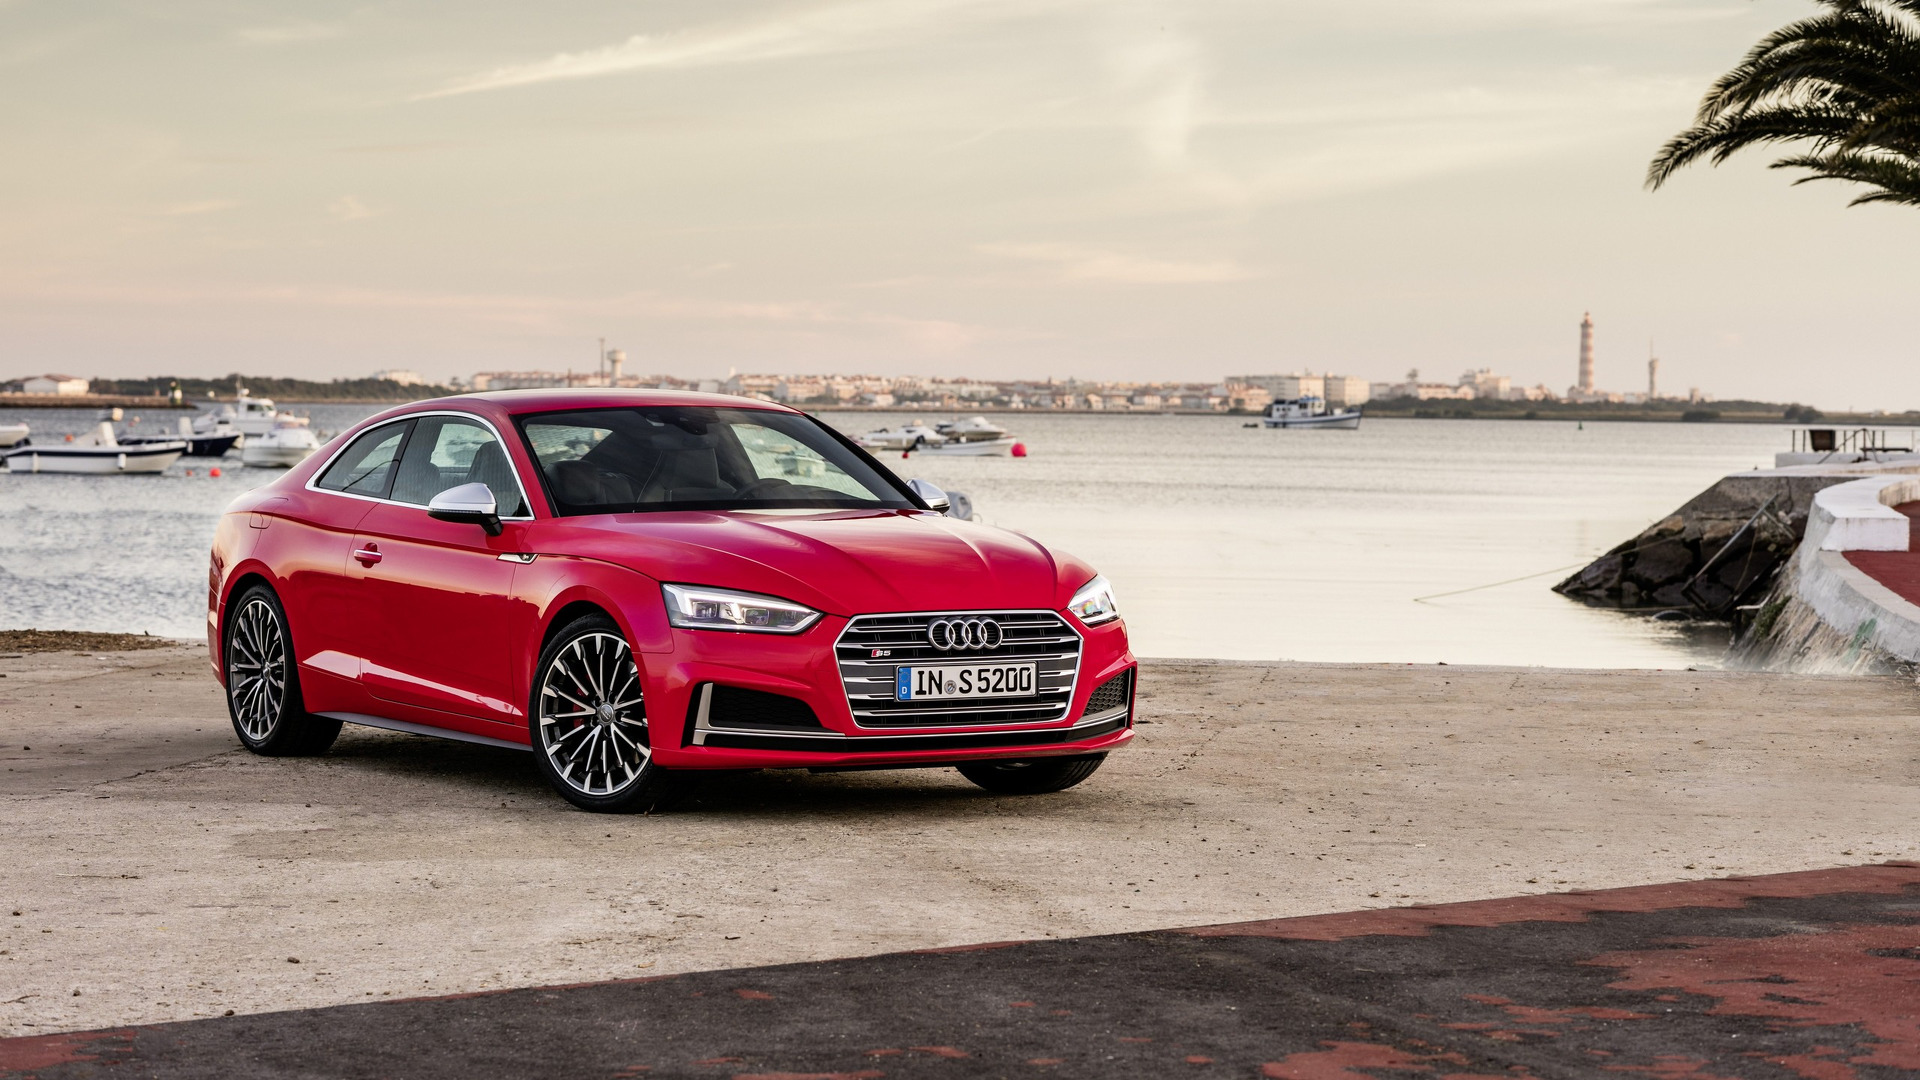 Rent A Audi A5 Coupe For A Day Price